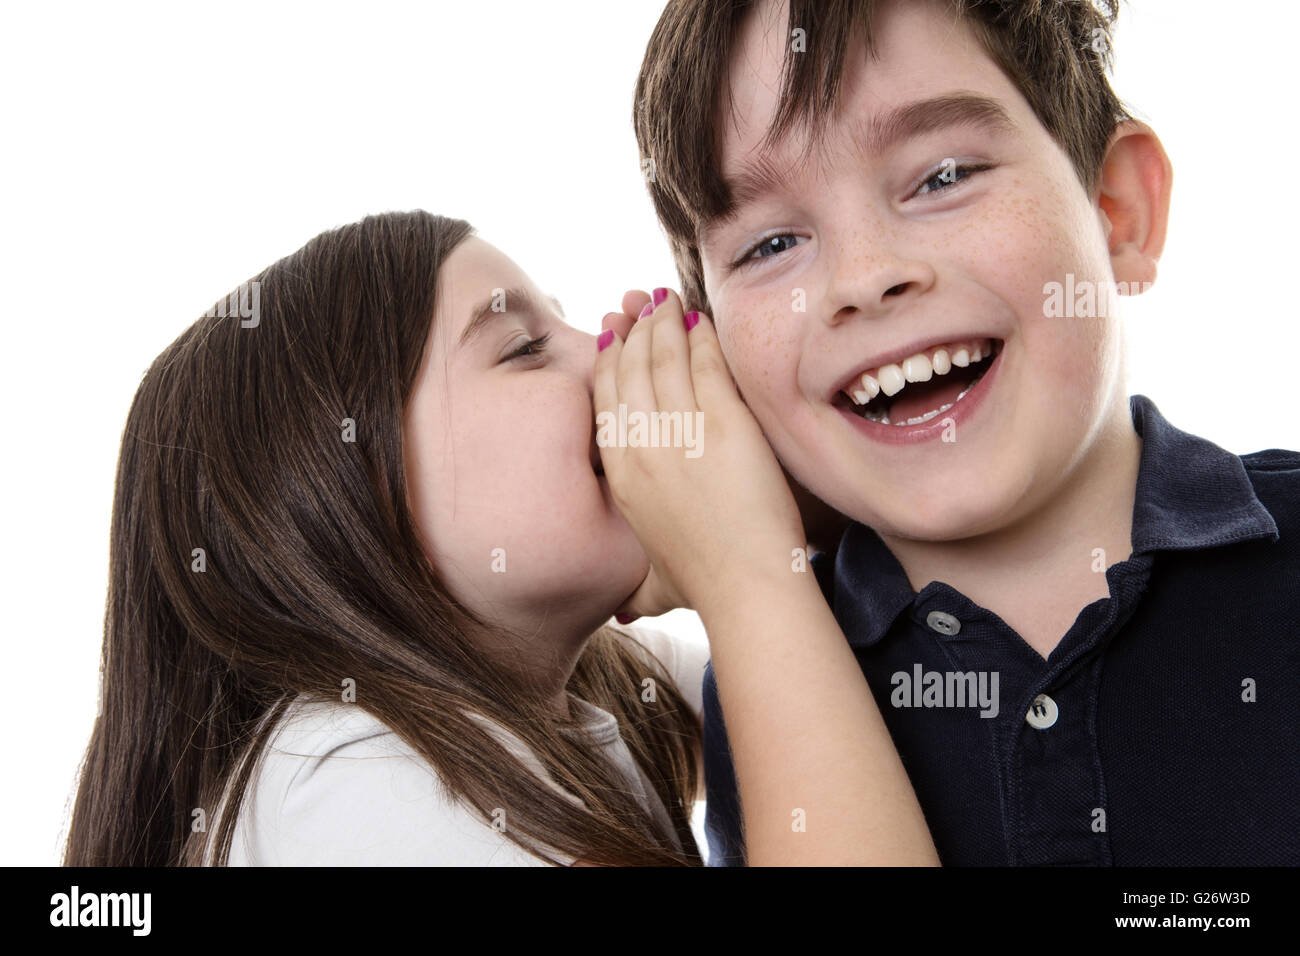 two children whispering into each others ear sharing a secret! Stock Photo